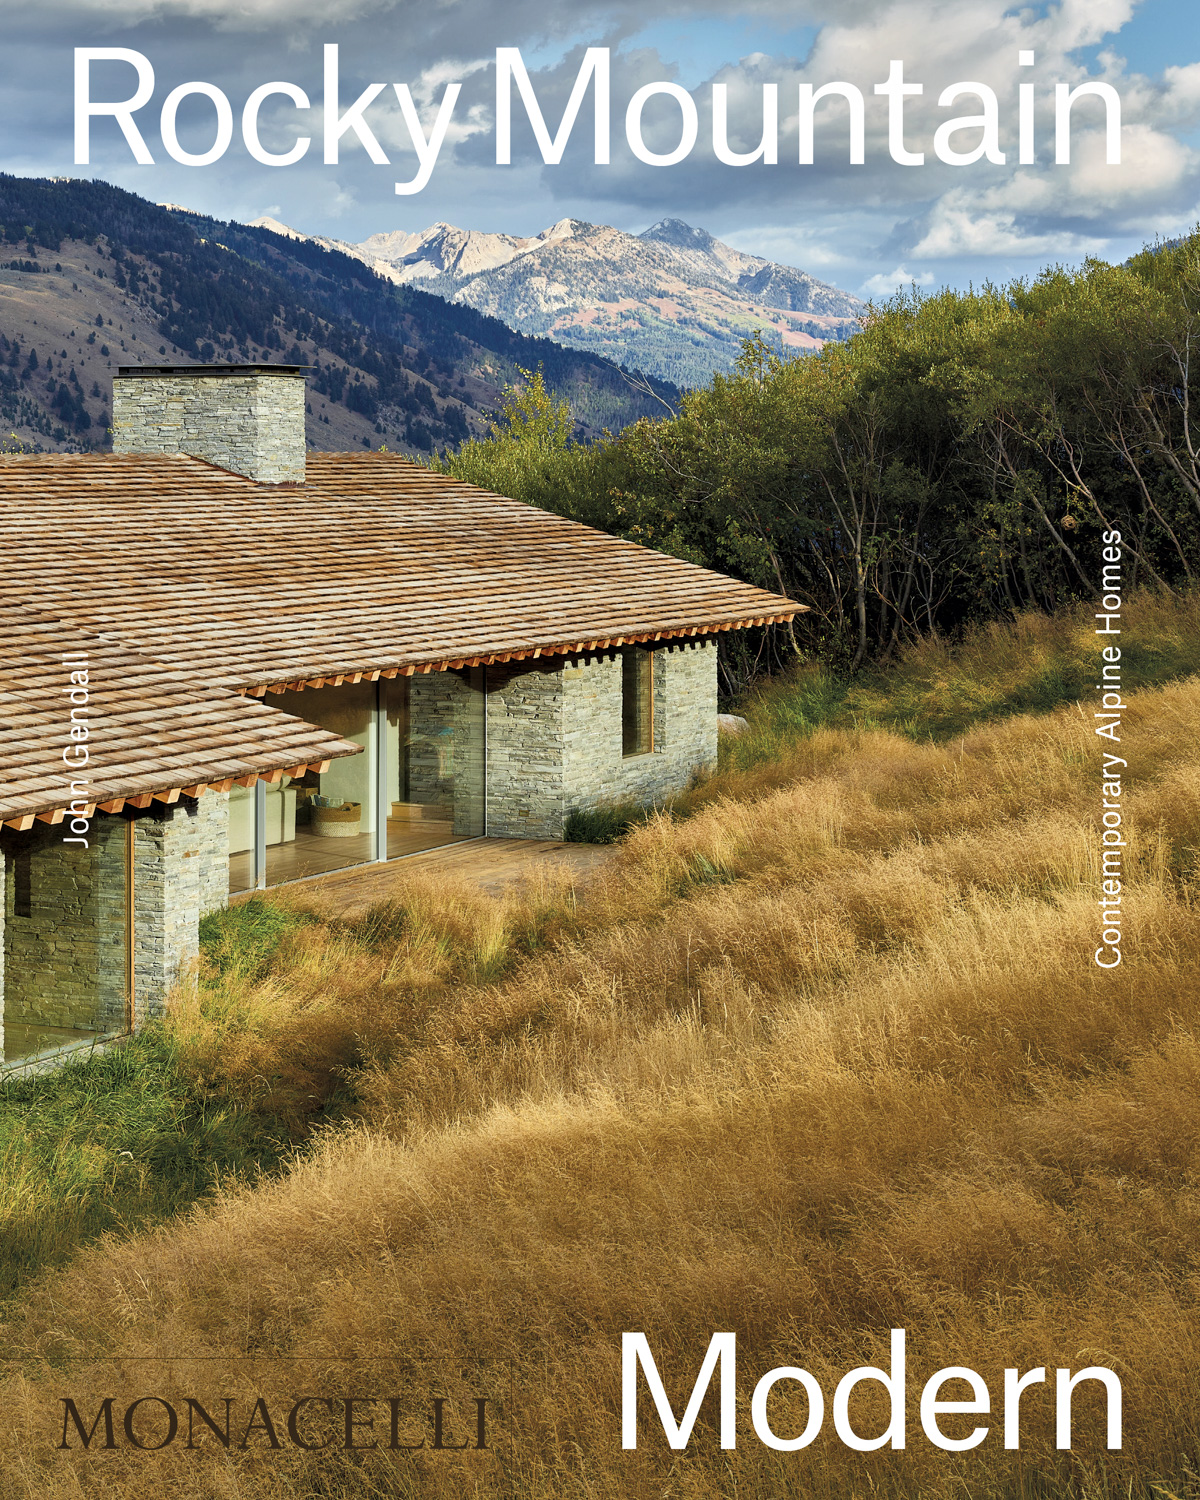 Cover of Rocky Mountain Modern book featuring a home in a field with mountain views